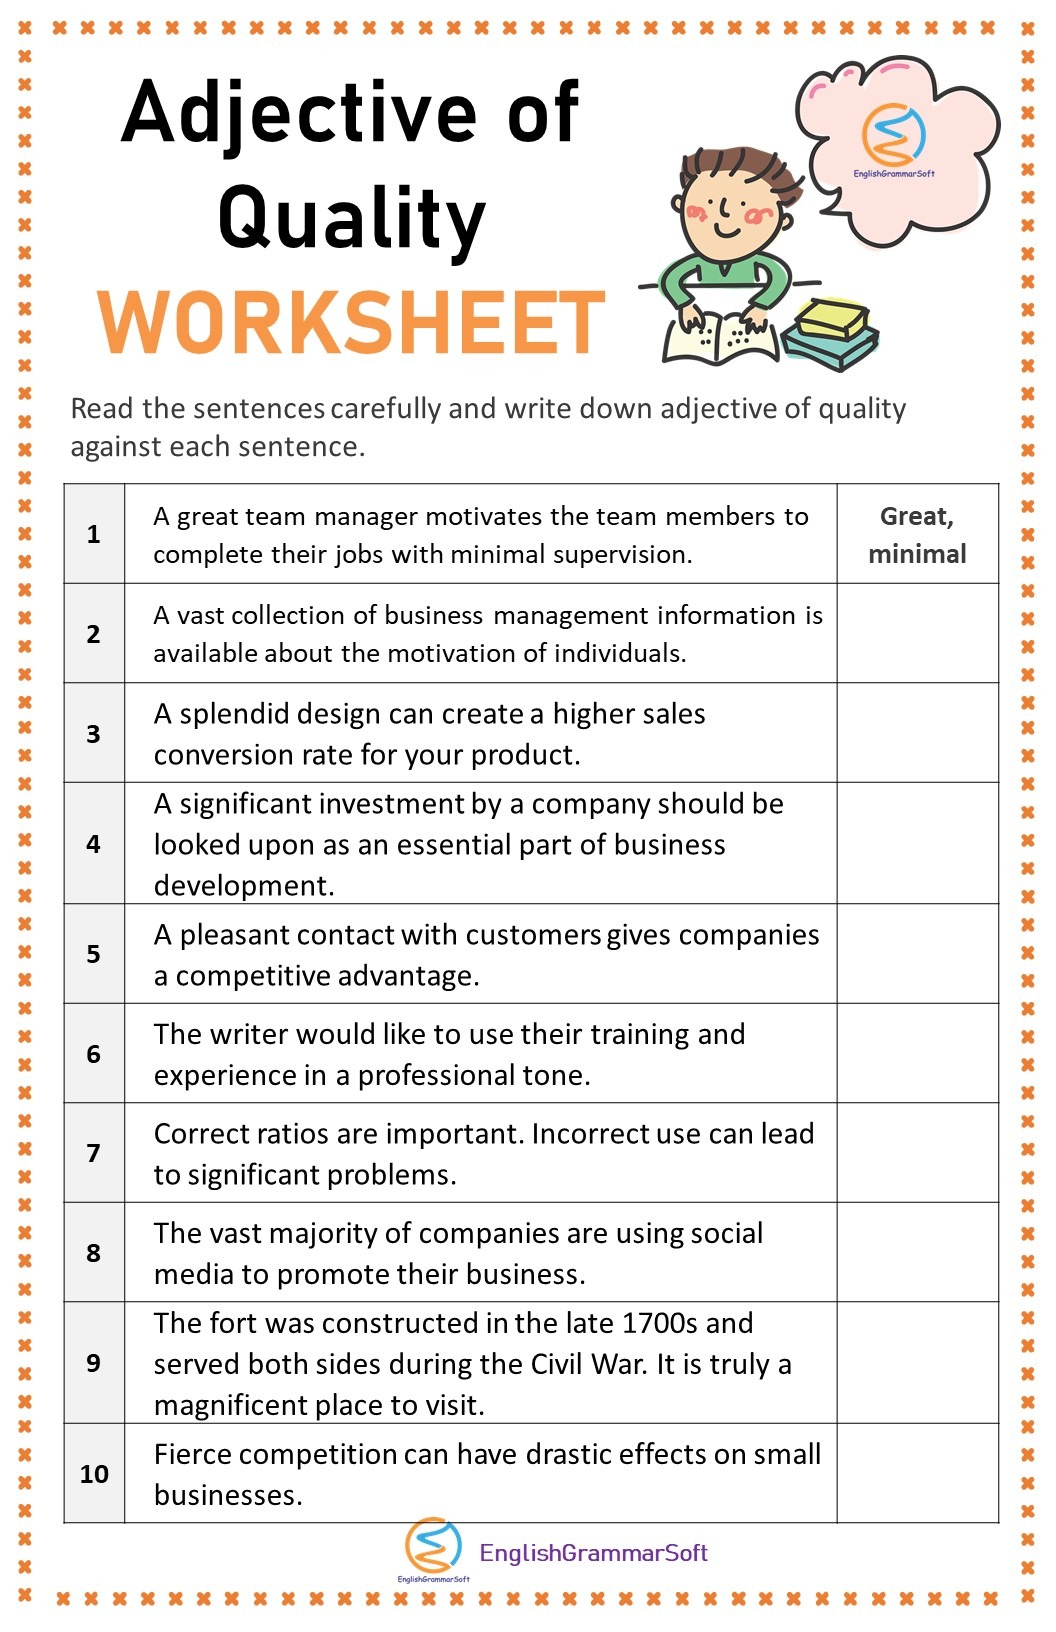 Adjective of Quality Worksheet